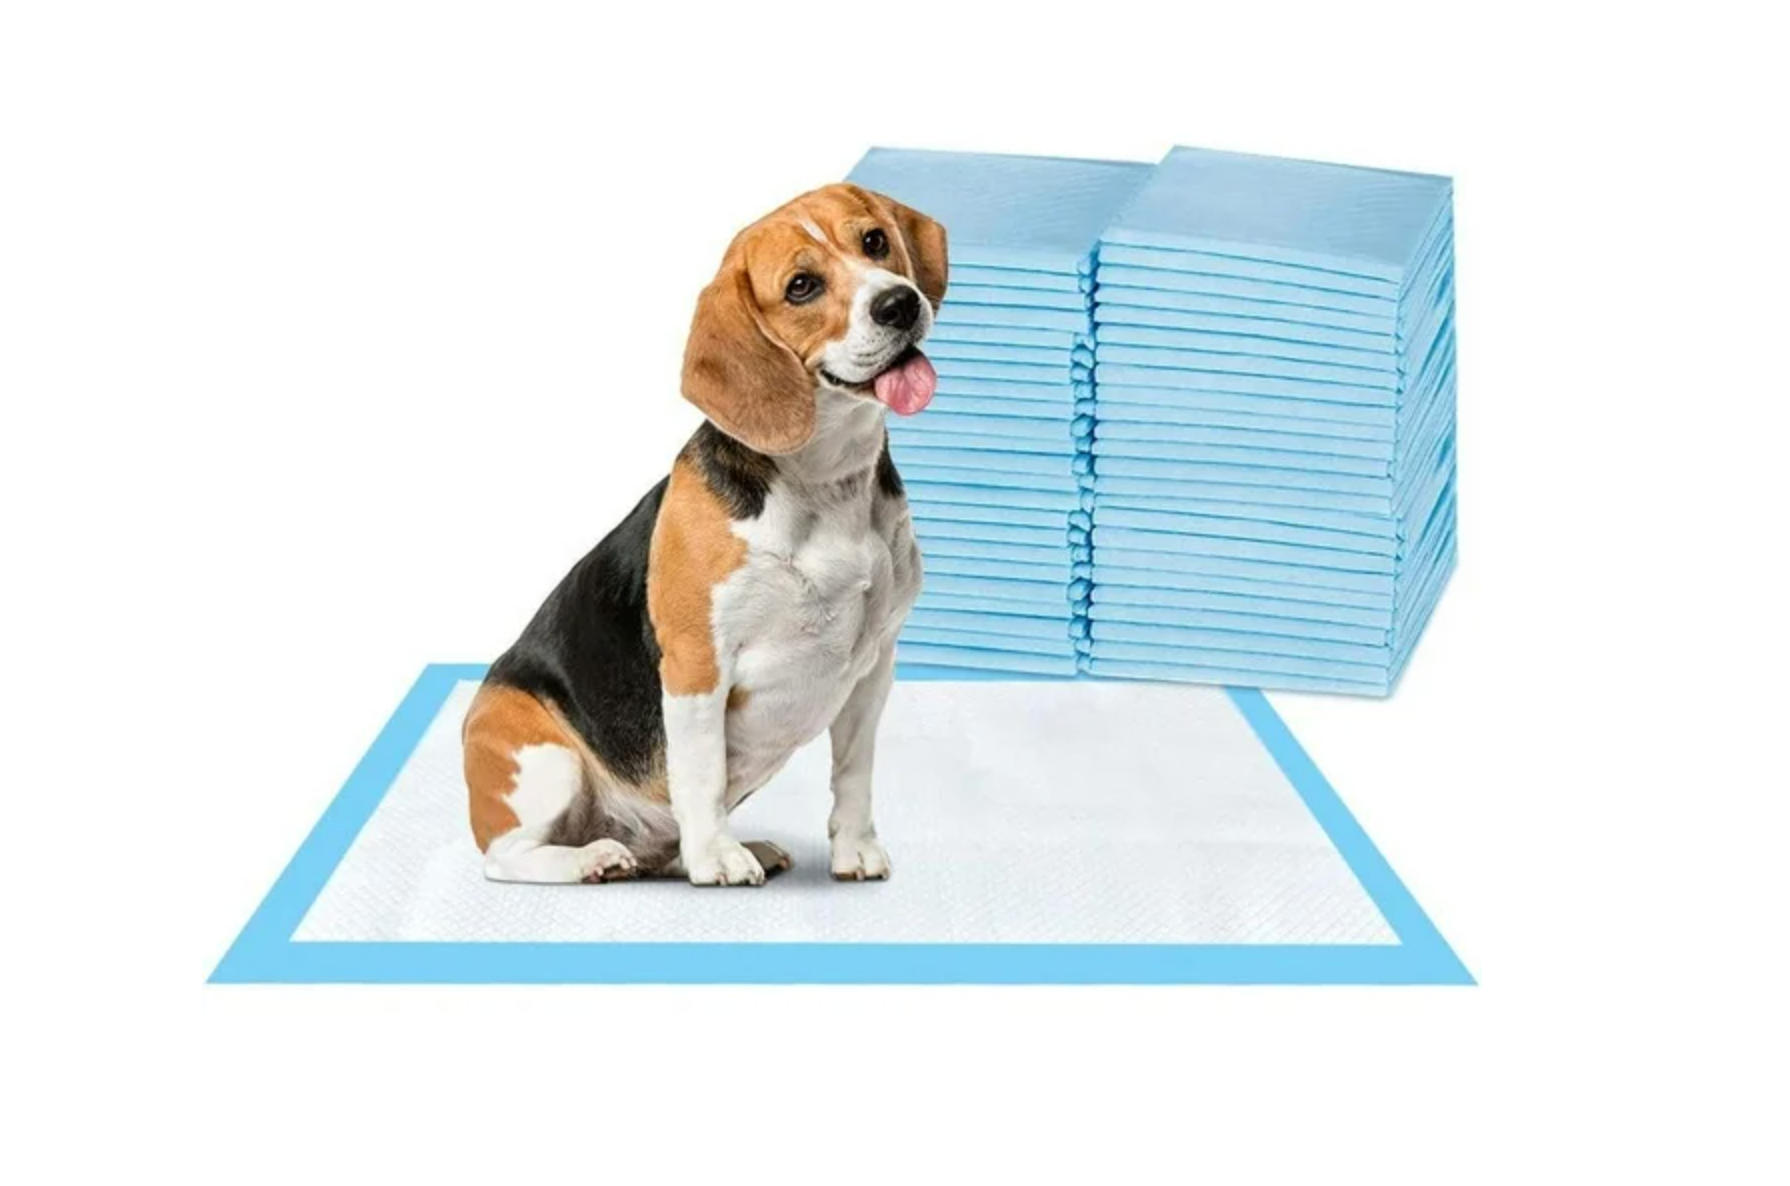 Pee Pads for Dogs: 50-Pack Leak-Proof Training Pads, 23"x30" - Super Absorbent Puppy Pee Pads for Indoor Use